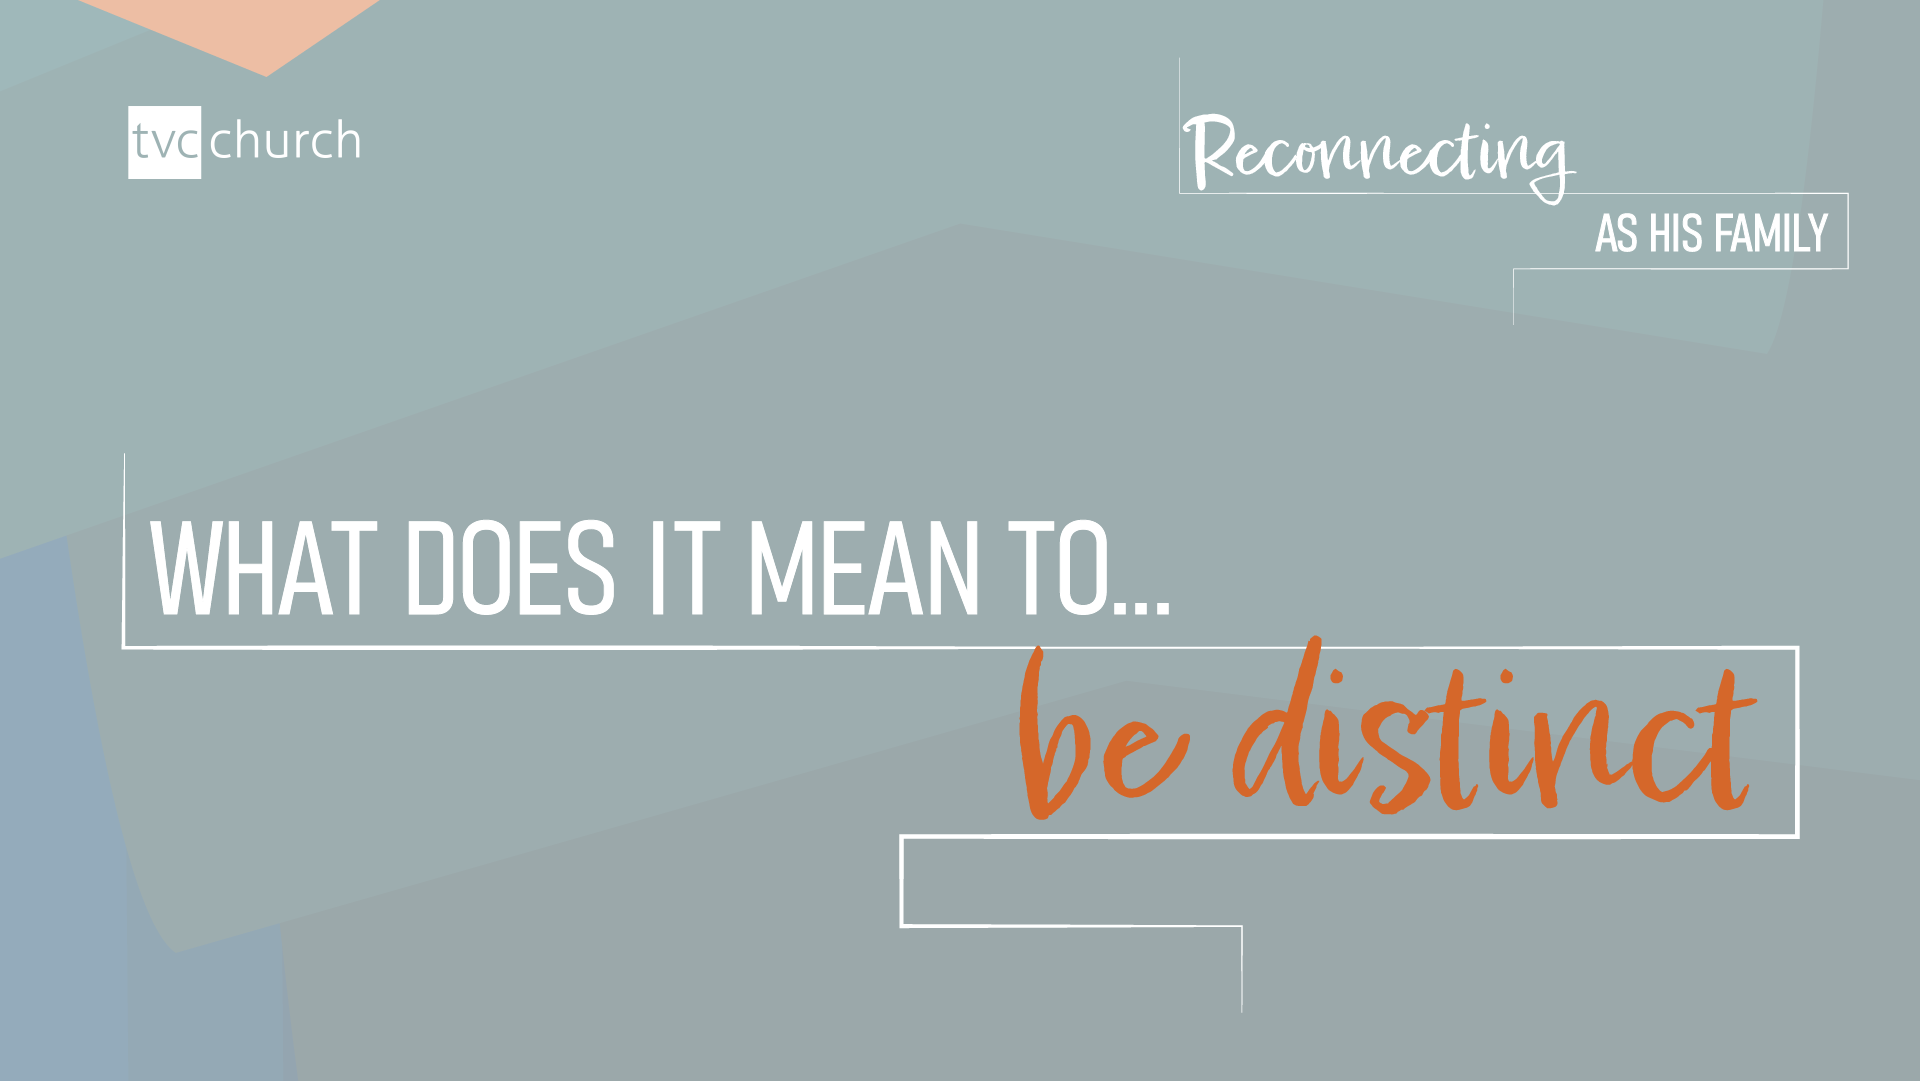 What does it mean to be distinct?